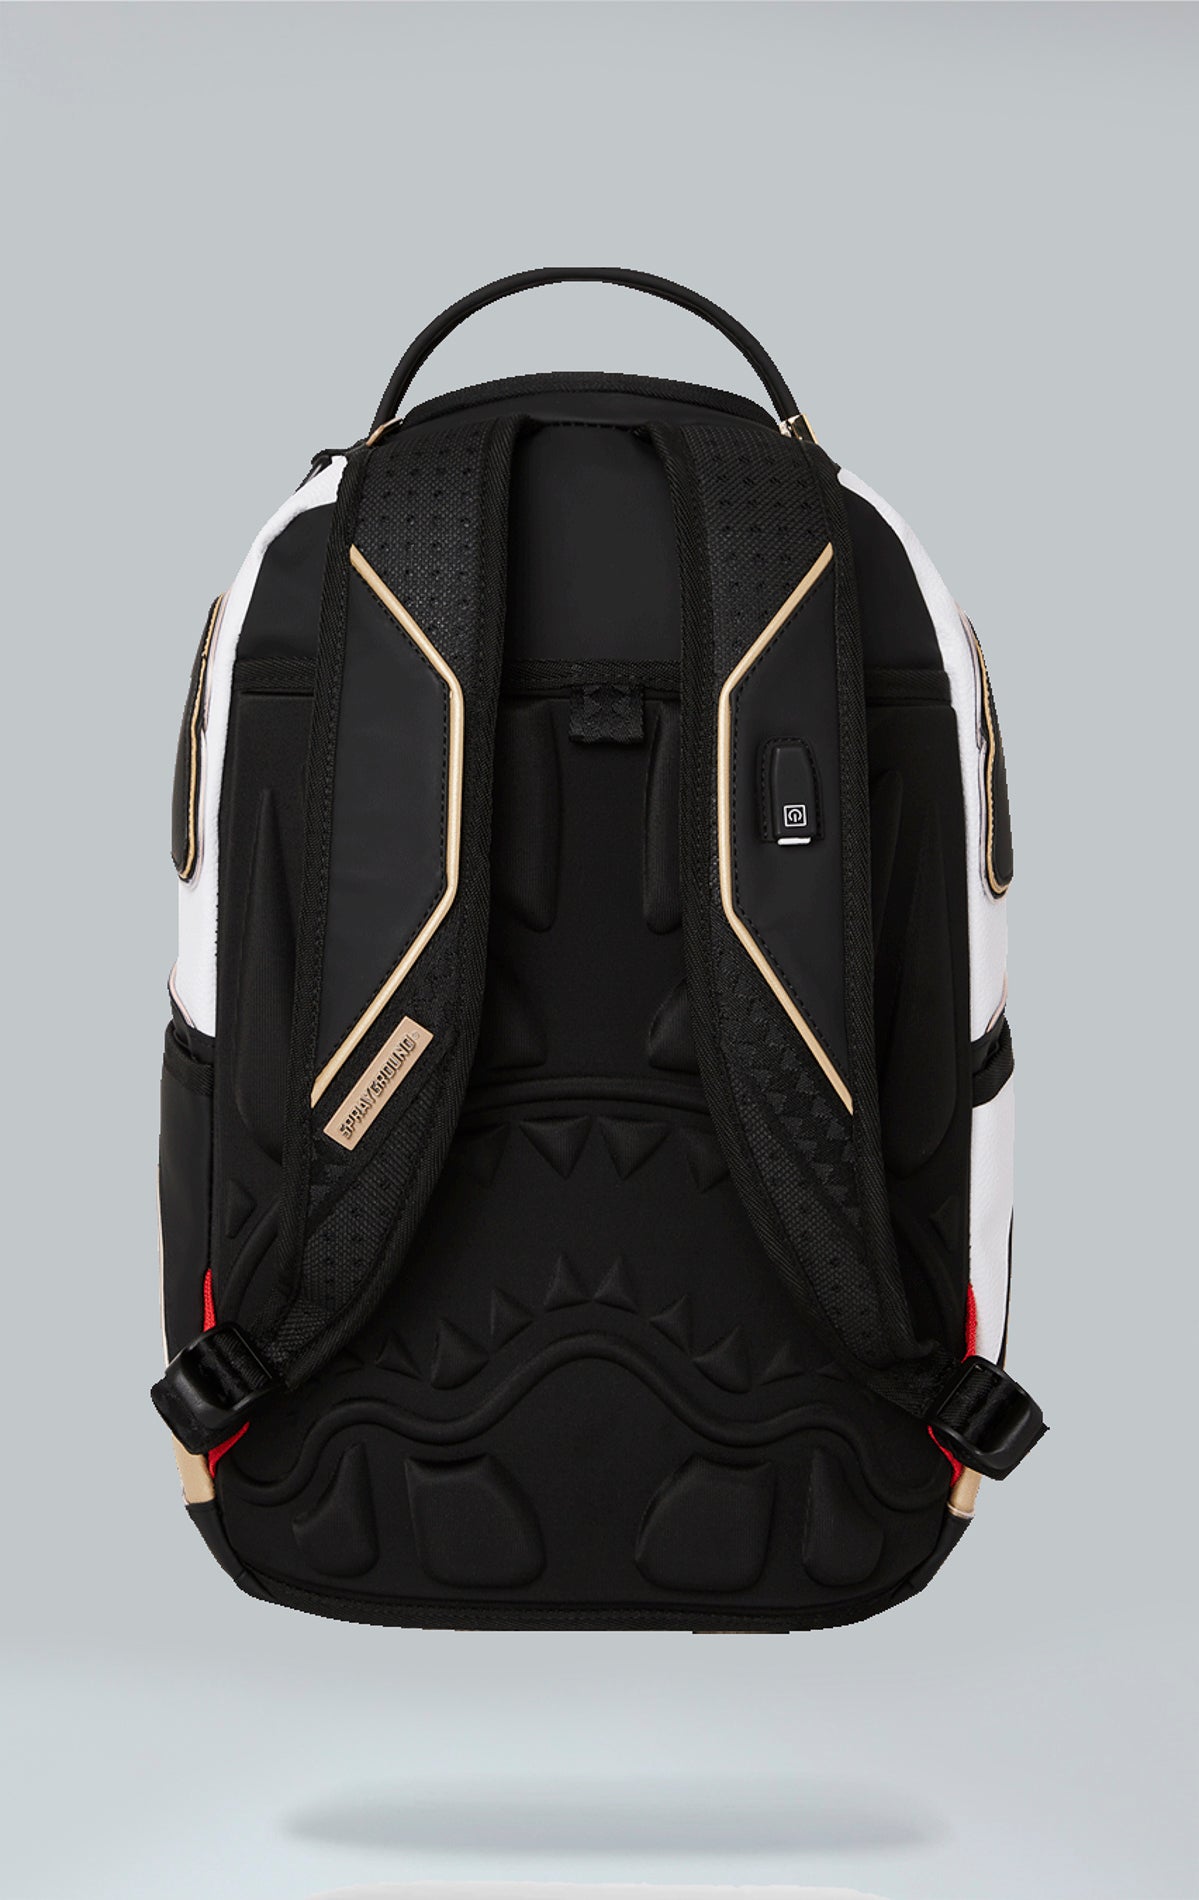 Sprayground x Formula E Jaguar backpack with built-in LED lights. Black water-resistant PVC backpack with Formula E Jaguar design. Includes laptop compartment, organizer pocket, and USB cable for charging. Note: Lithium battery inside, check with airline before travel.